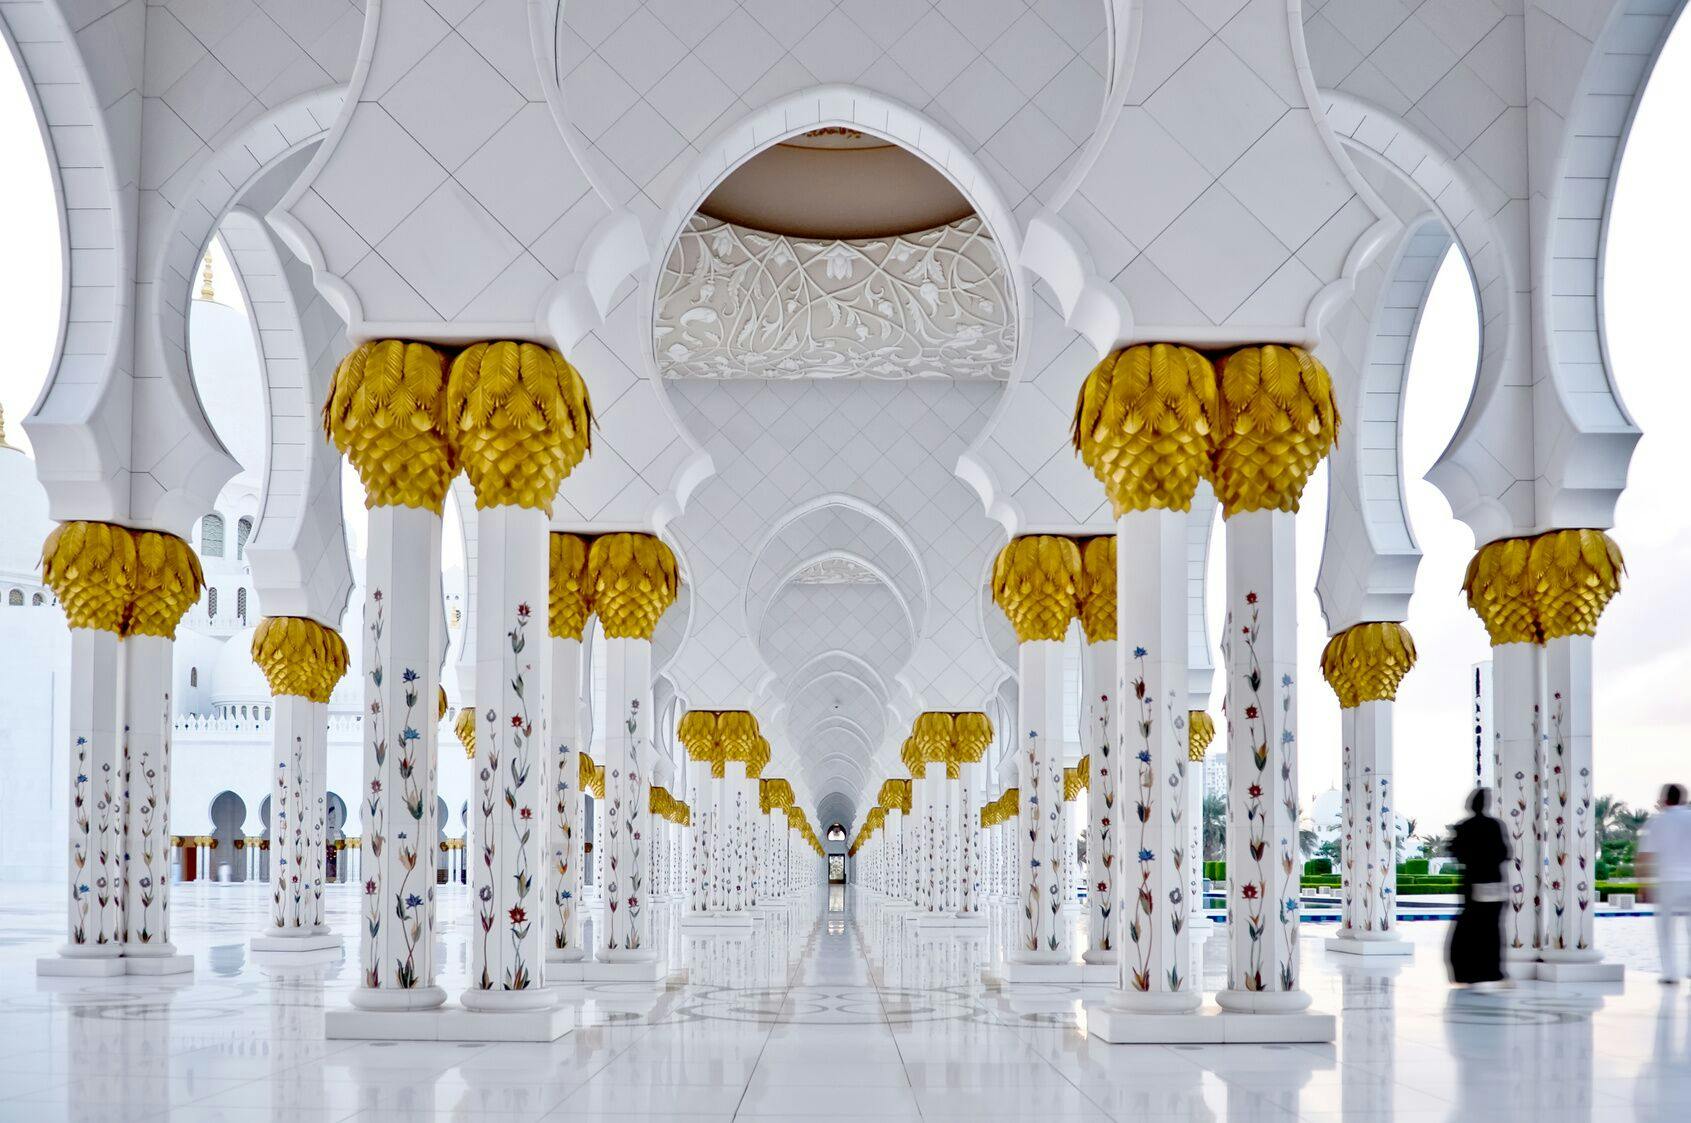 Day trip of Abu Dhabi and its royal palaces Musement